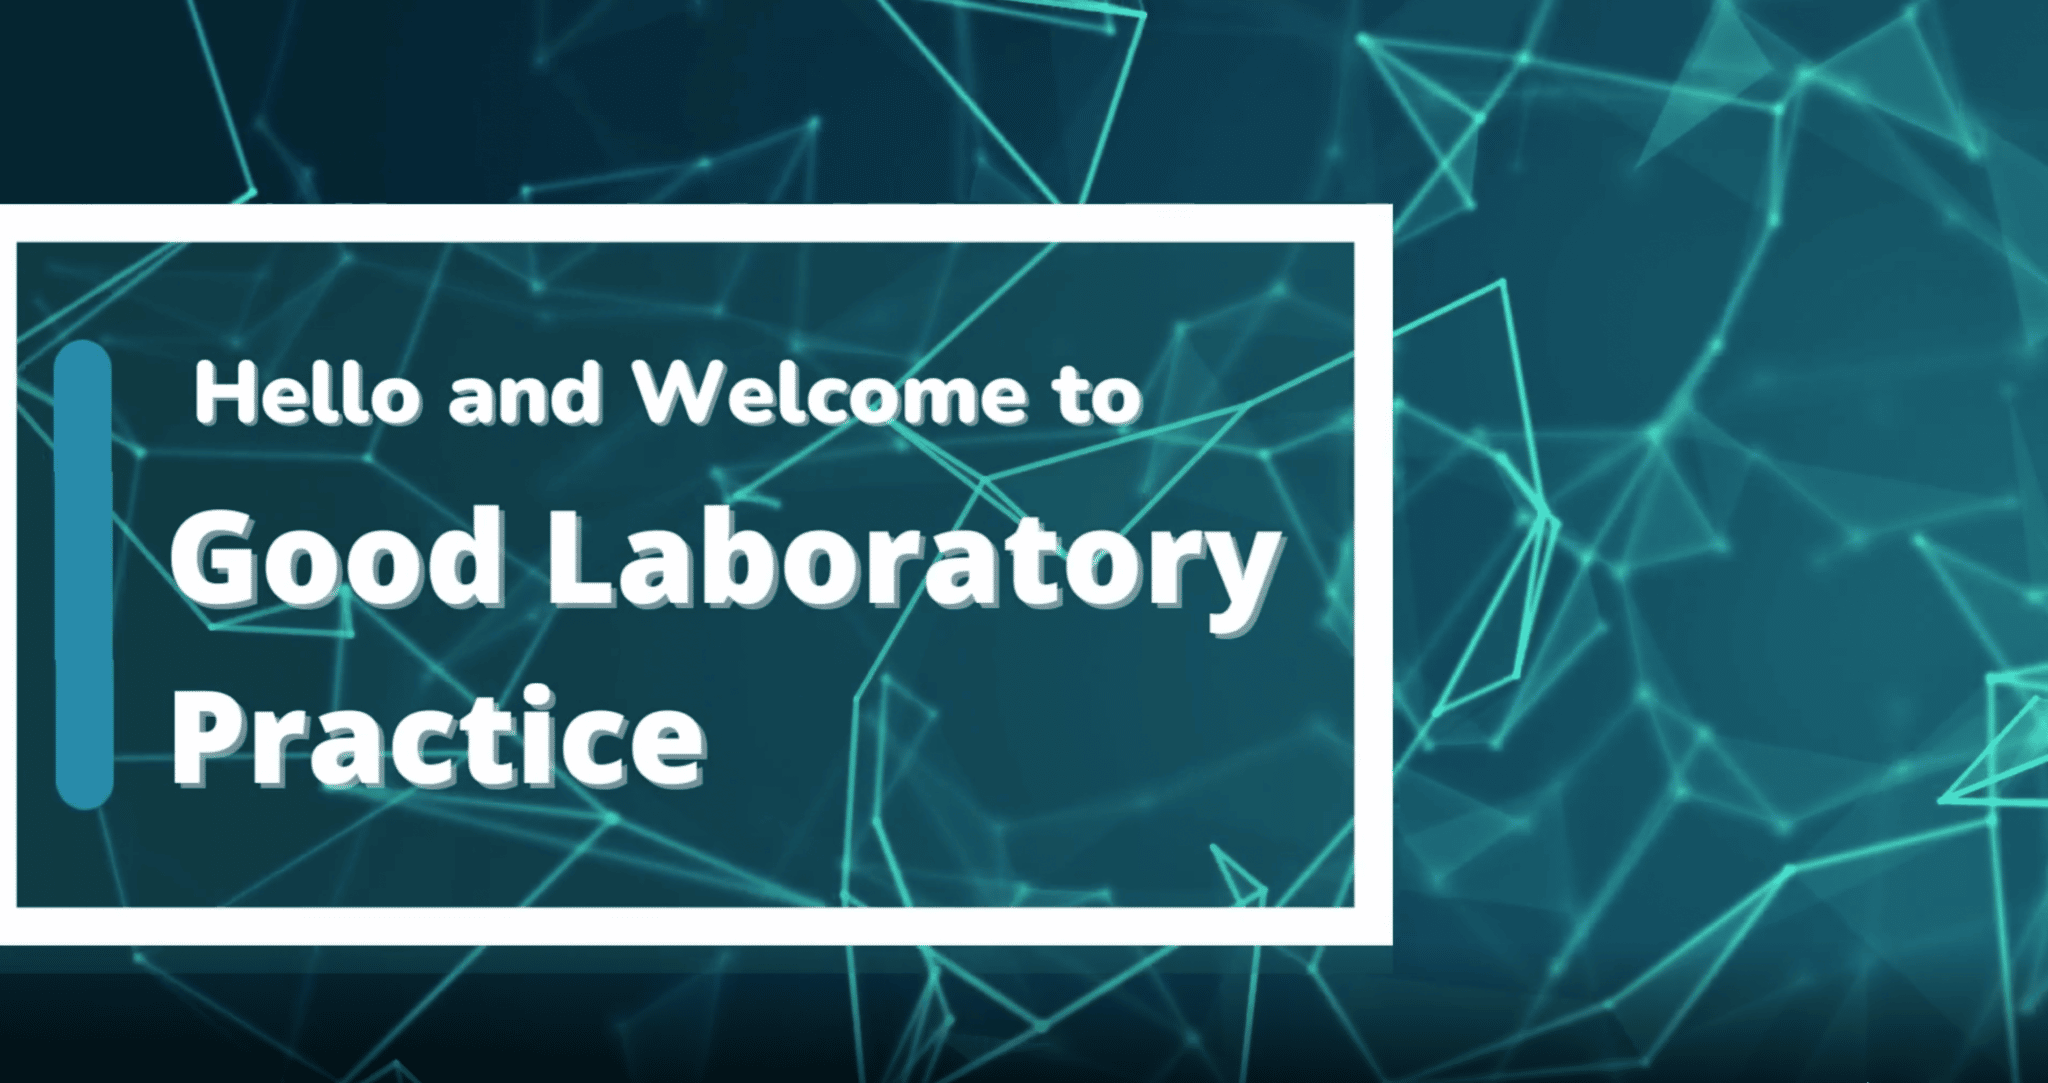 Introduction to Good Laboratory Practice (GLP)